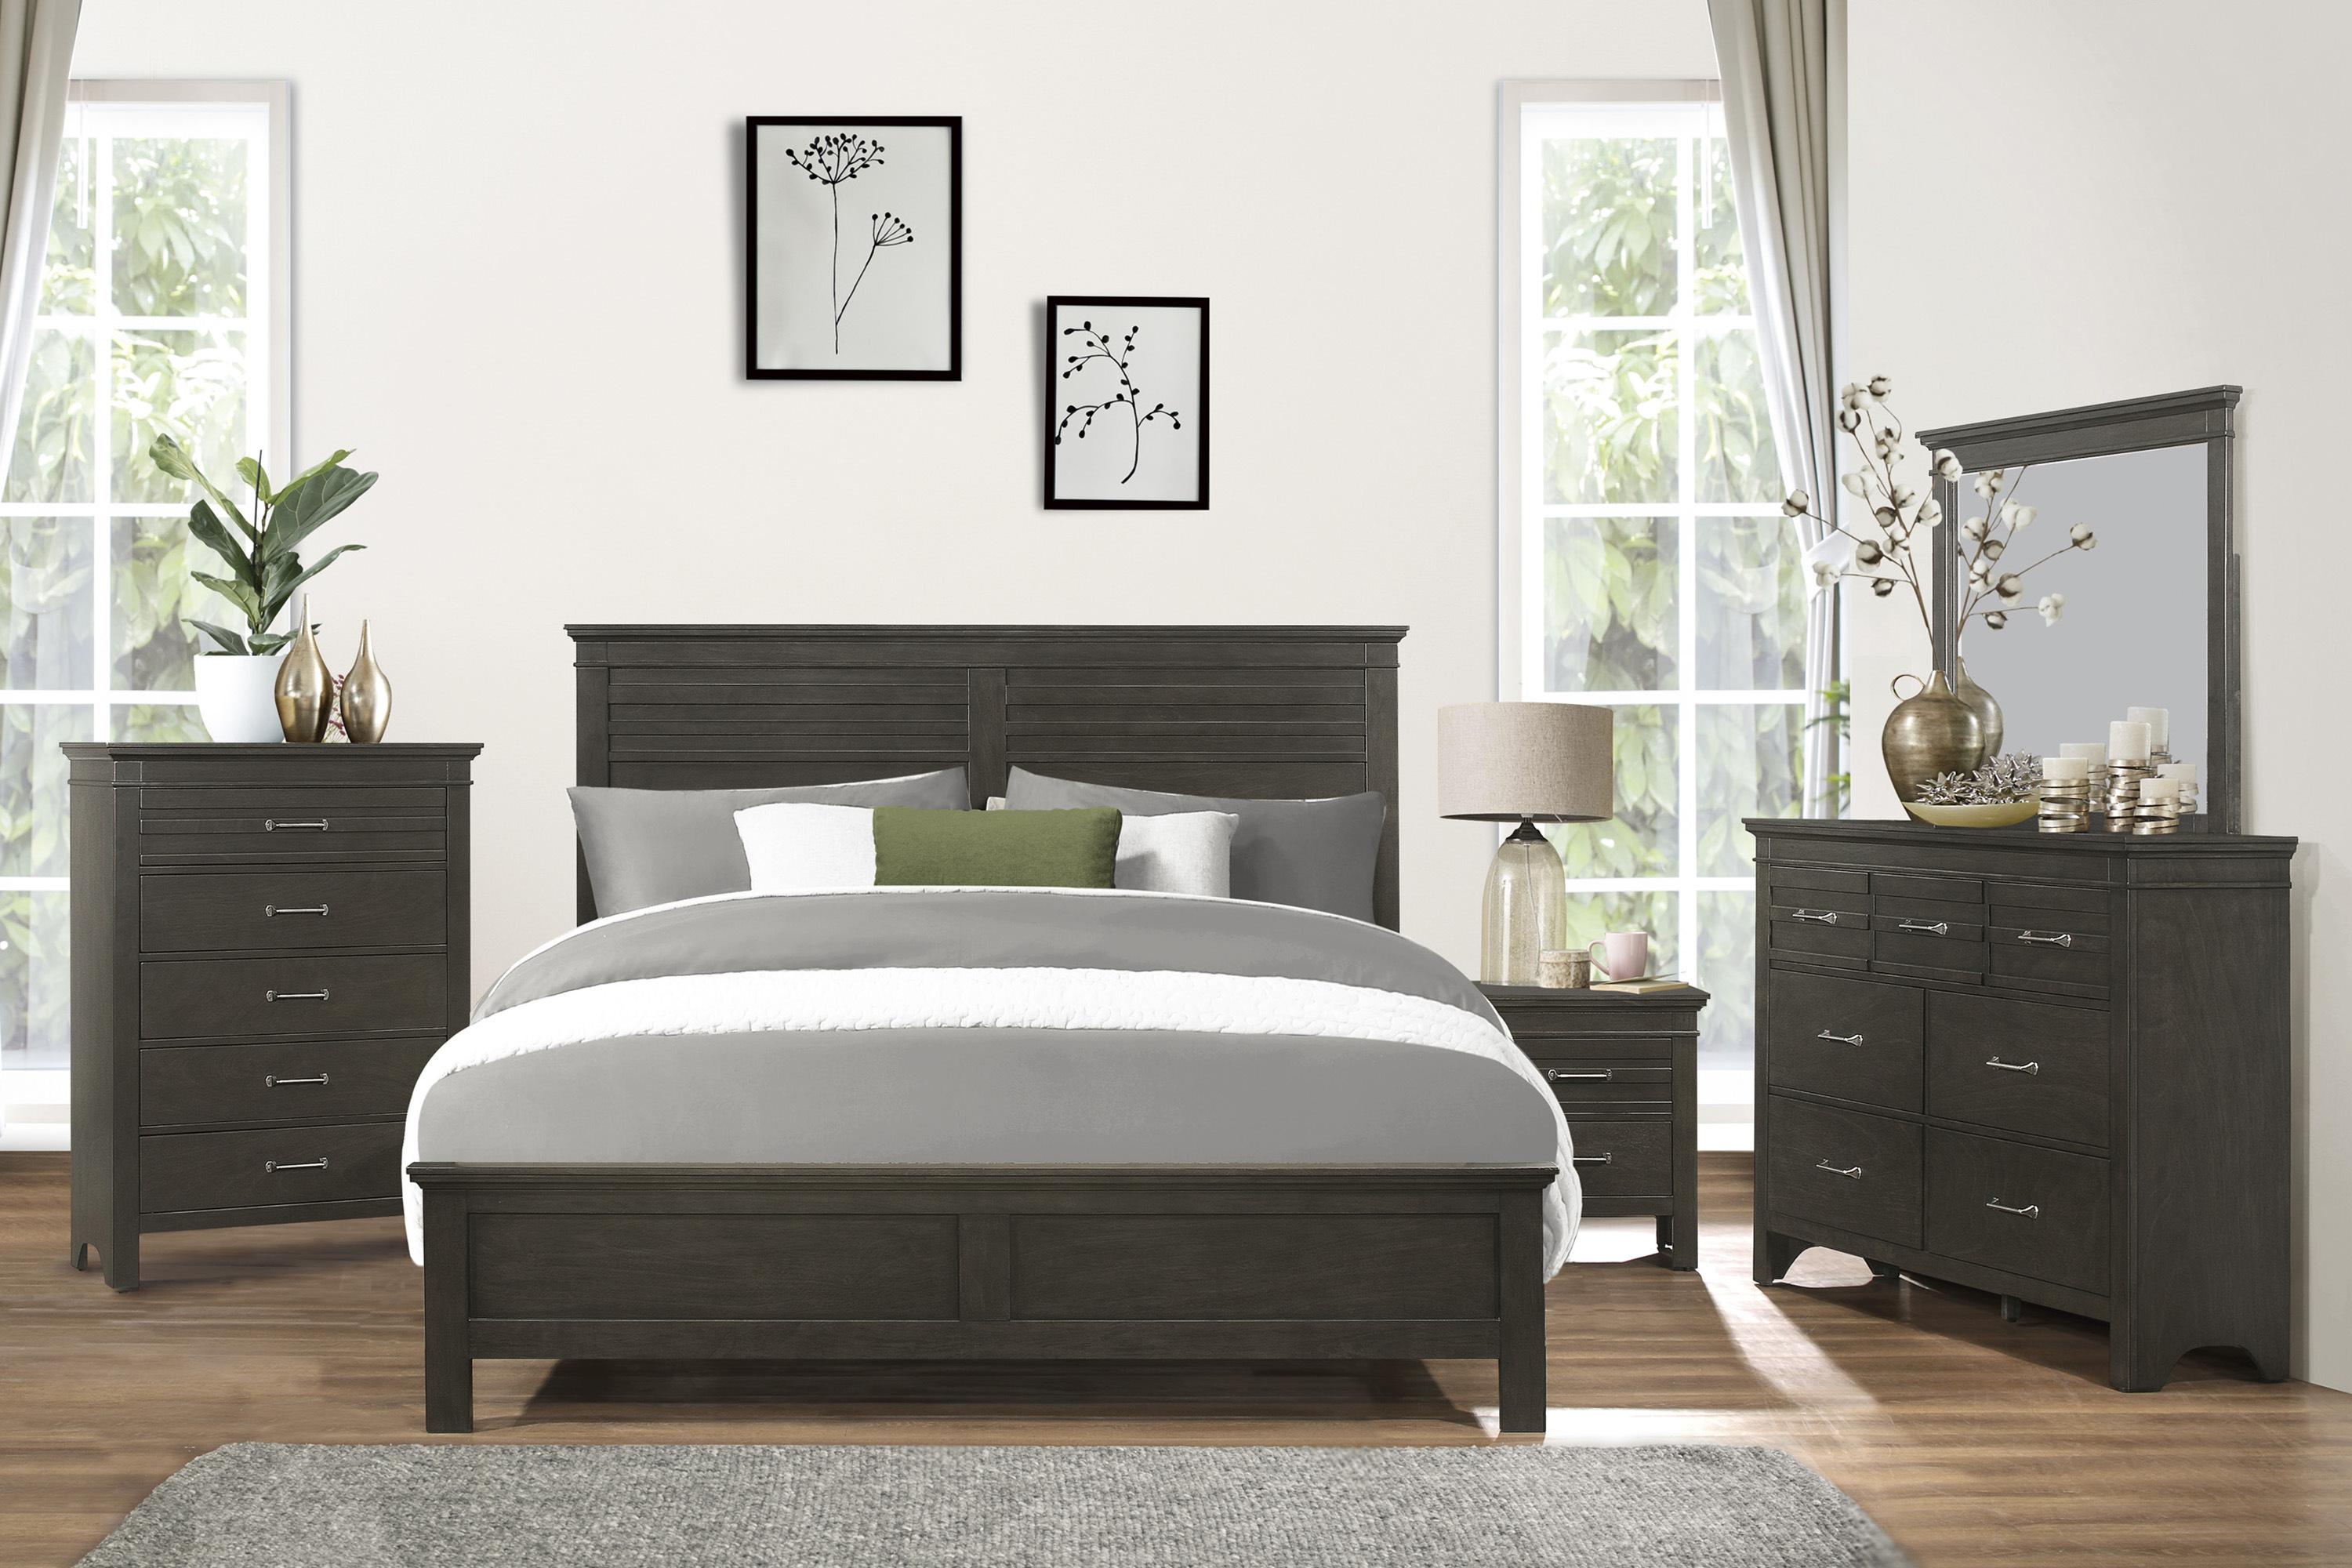 Transitional Bedroom Set 1675K-1CK-6PC Blaire Farm 1675K-1CK-6PC in Charcoal 